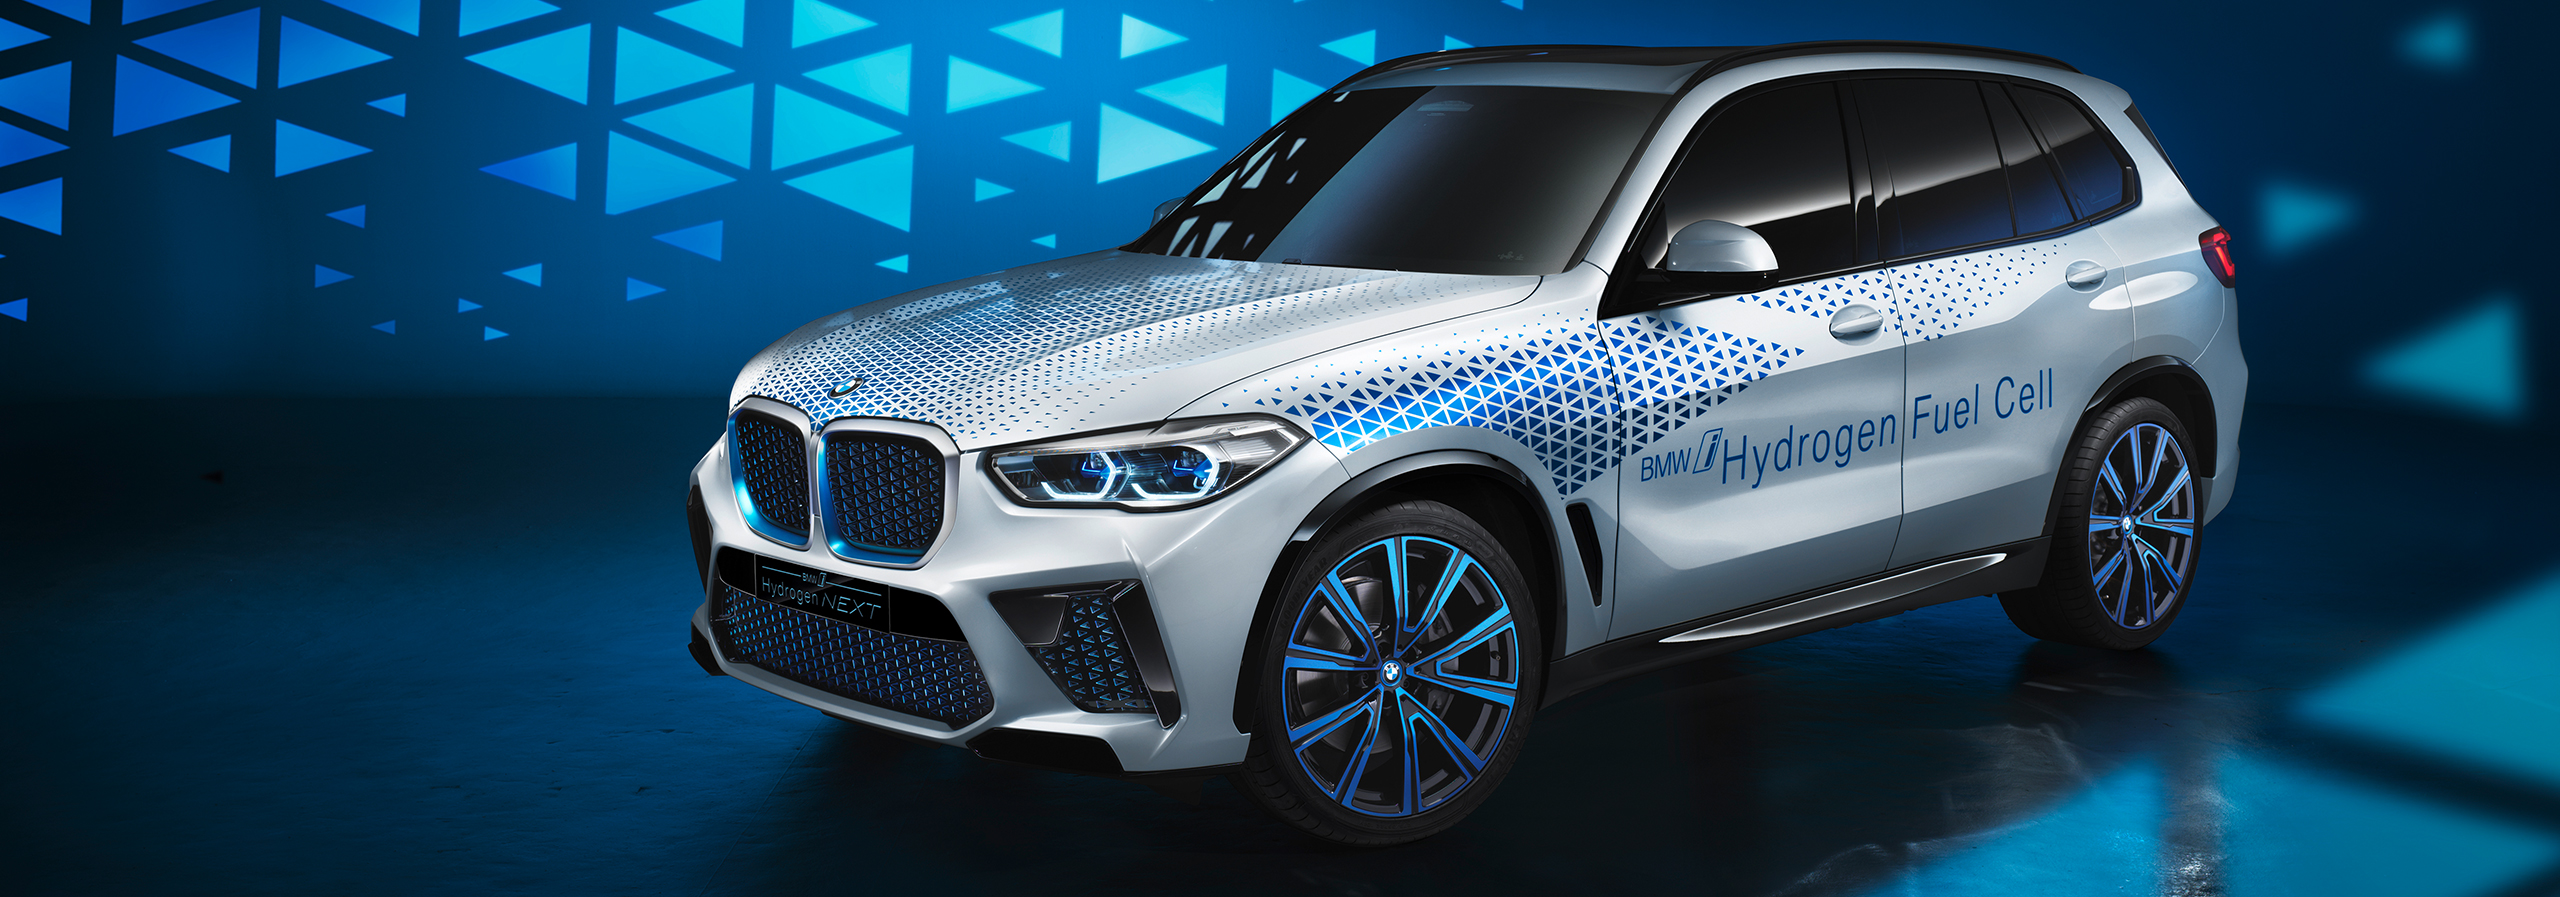 The Bmw I Hydrogen Next Our Fuel Cell Development Vehicle